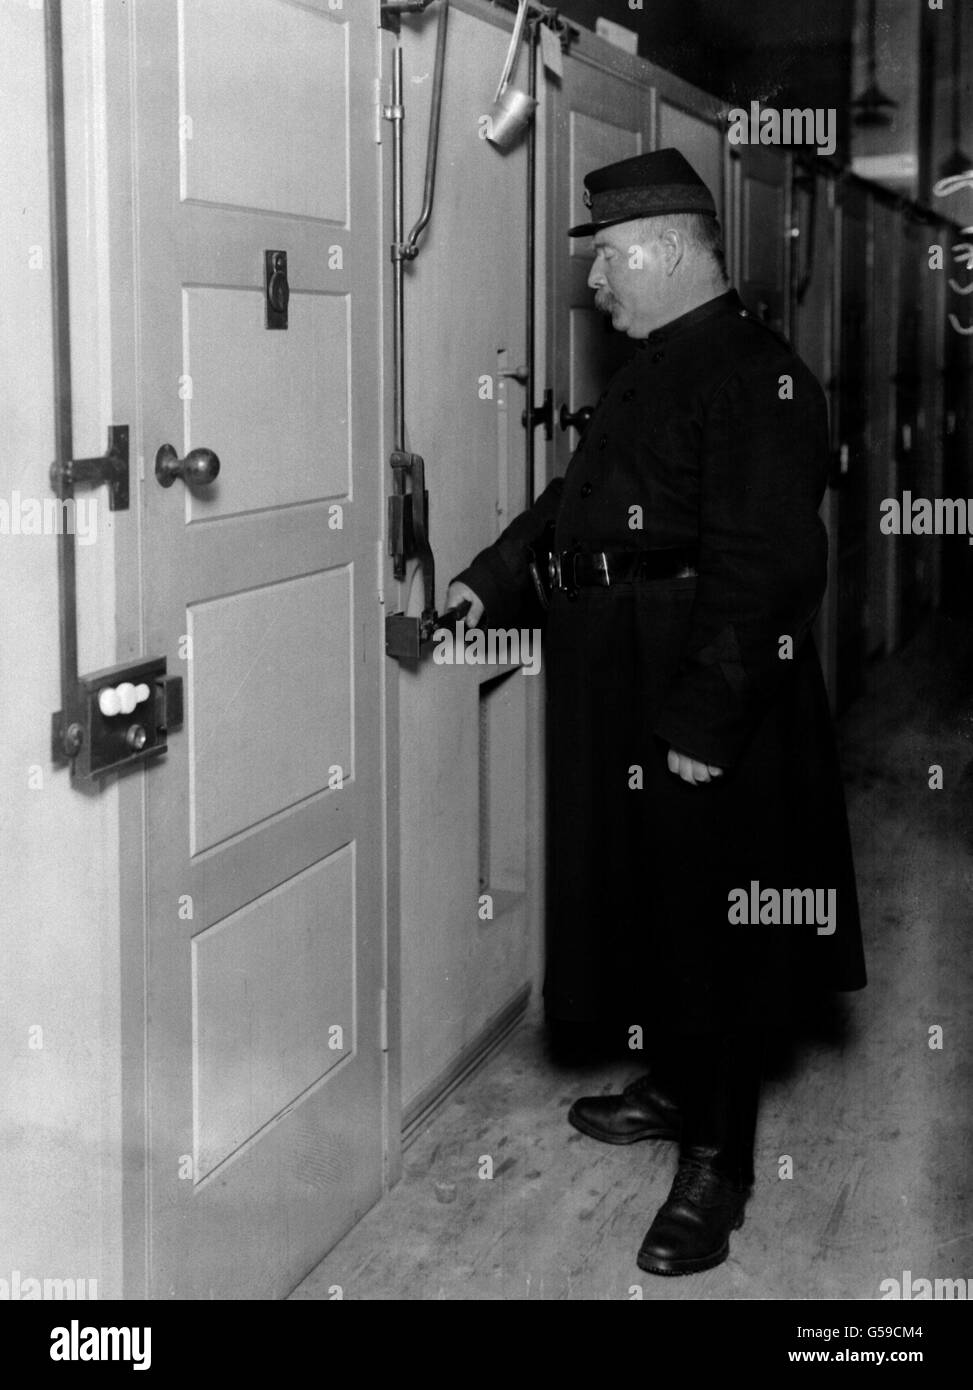 BORSTAL 1911: The Borstal institution at Feltham, West London. A warder using the unlocking device on a row of cells. Stock Photo